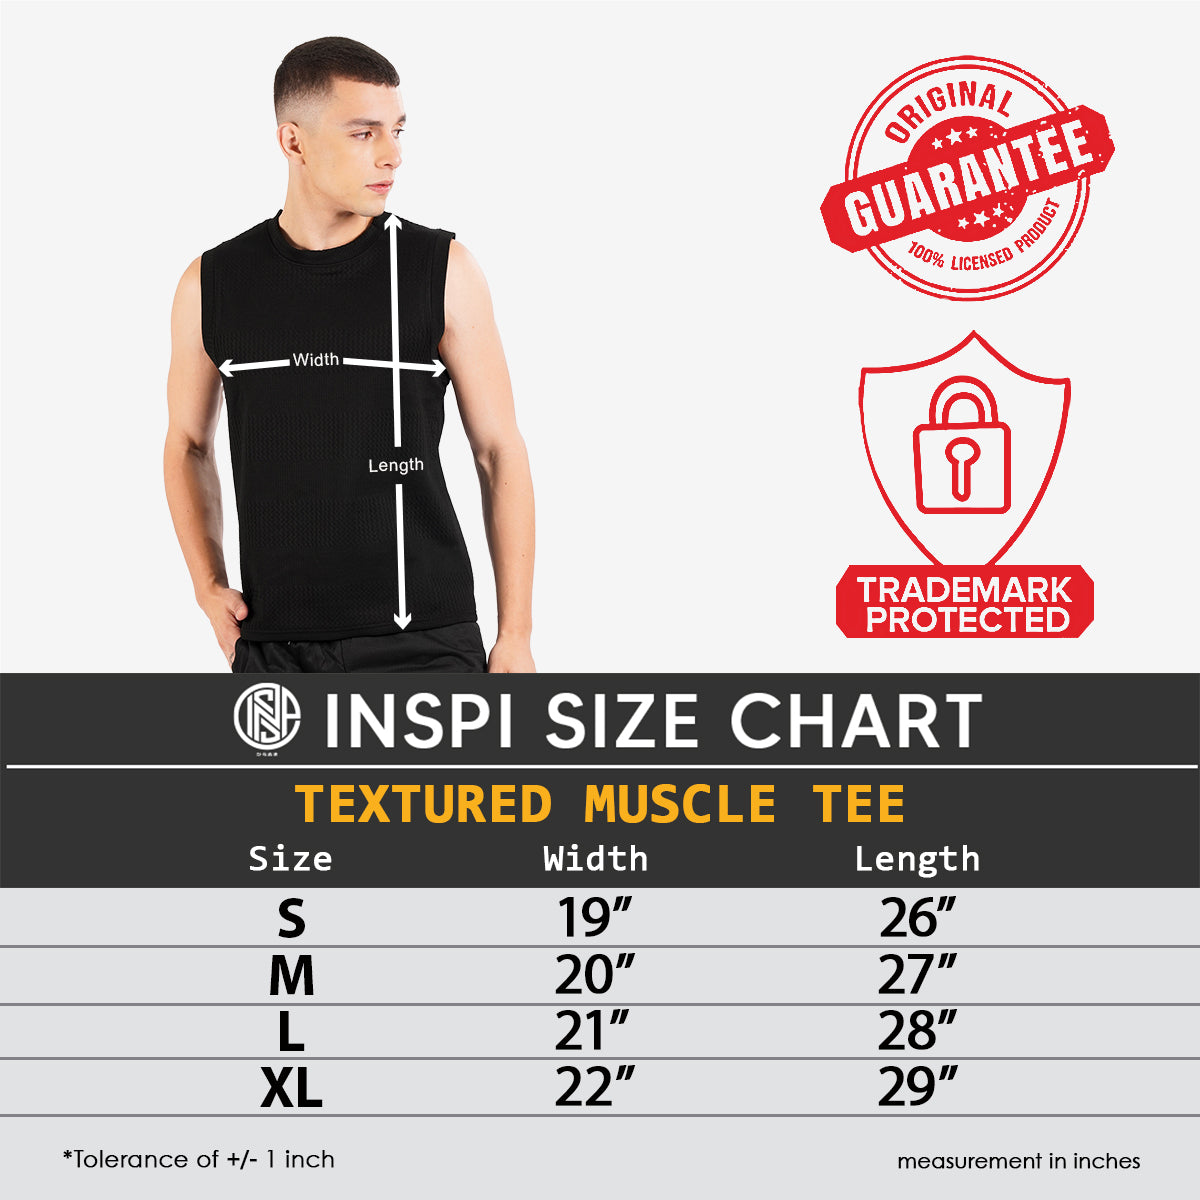 INSPI Textured Muscle Tee Collection For Men Sleeveless Striped Ivory Tank Top Sando For Women Gym Workout Clothes Exercise Outfit